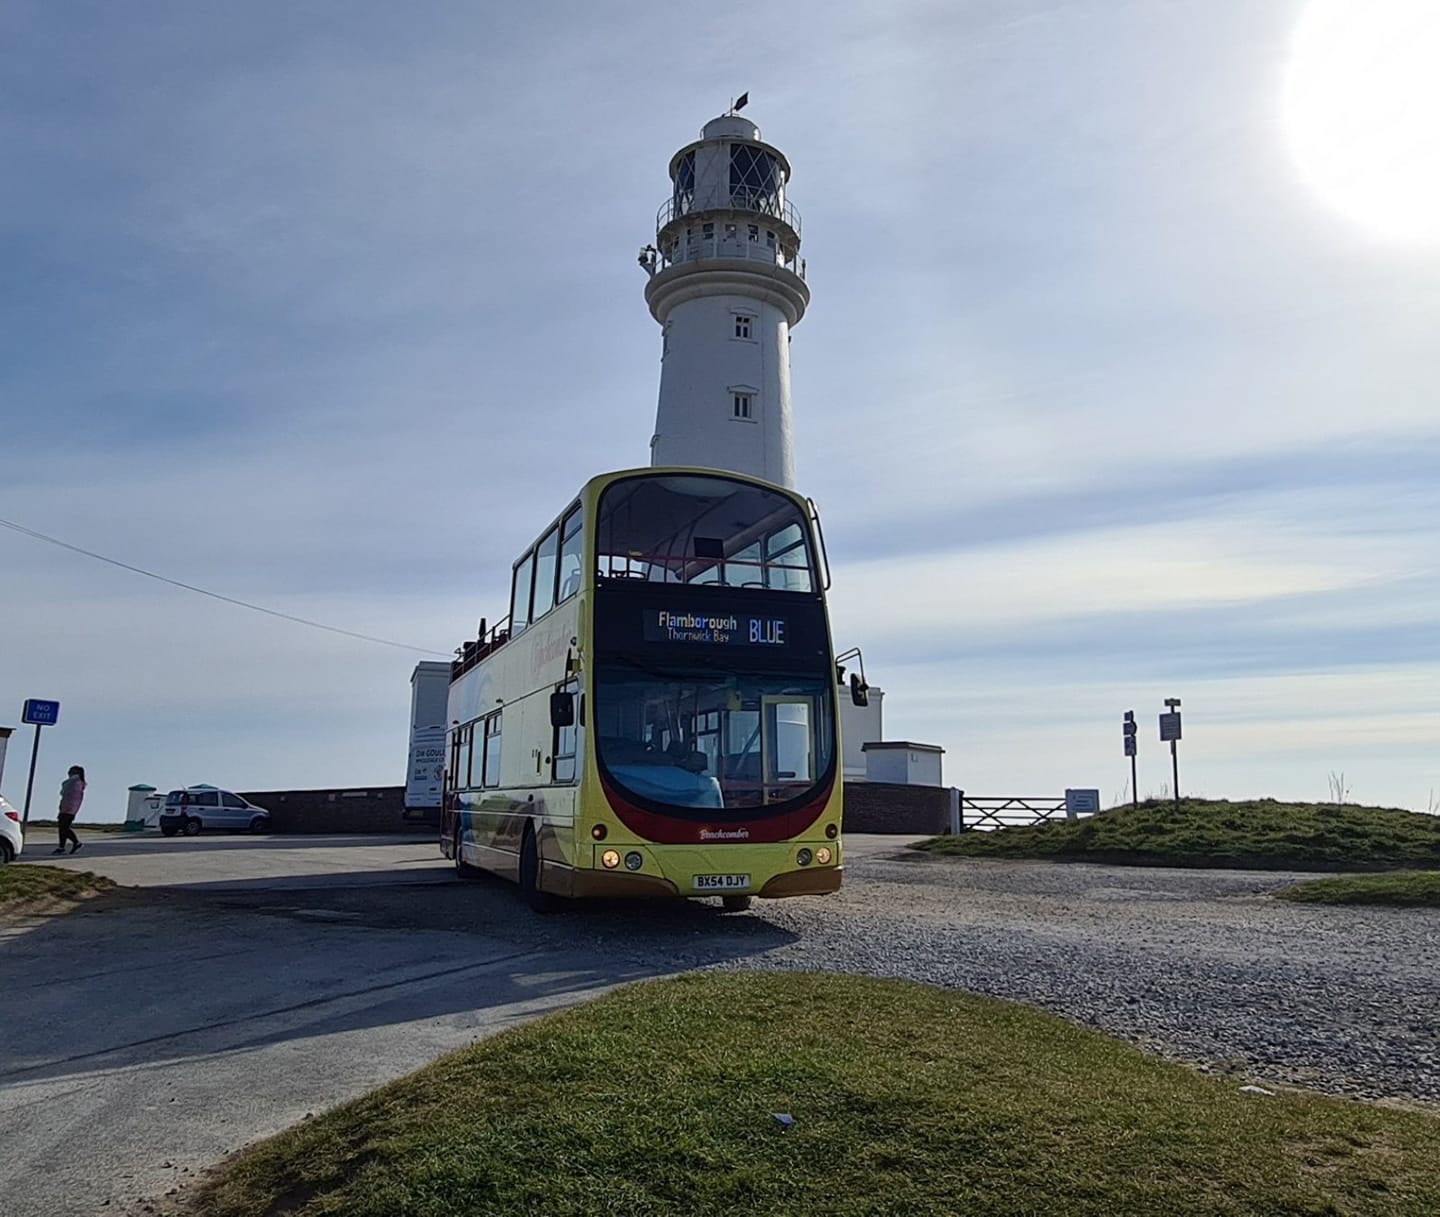 A Beachcomber open top bus in front of Flamborough Lighthouse